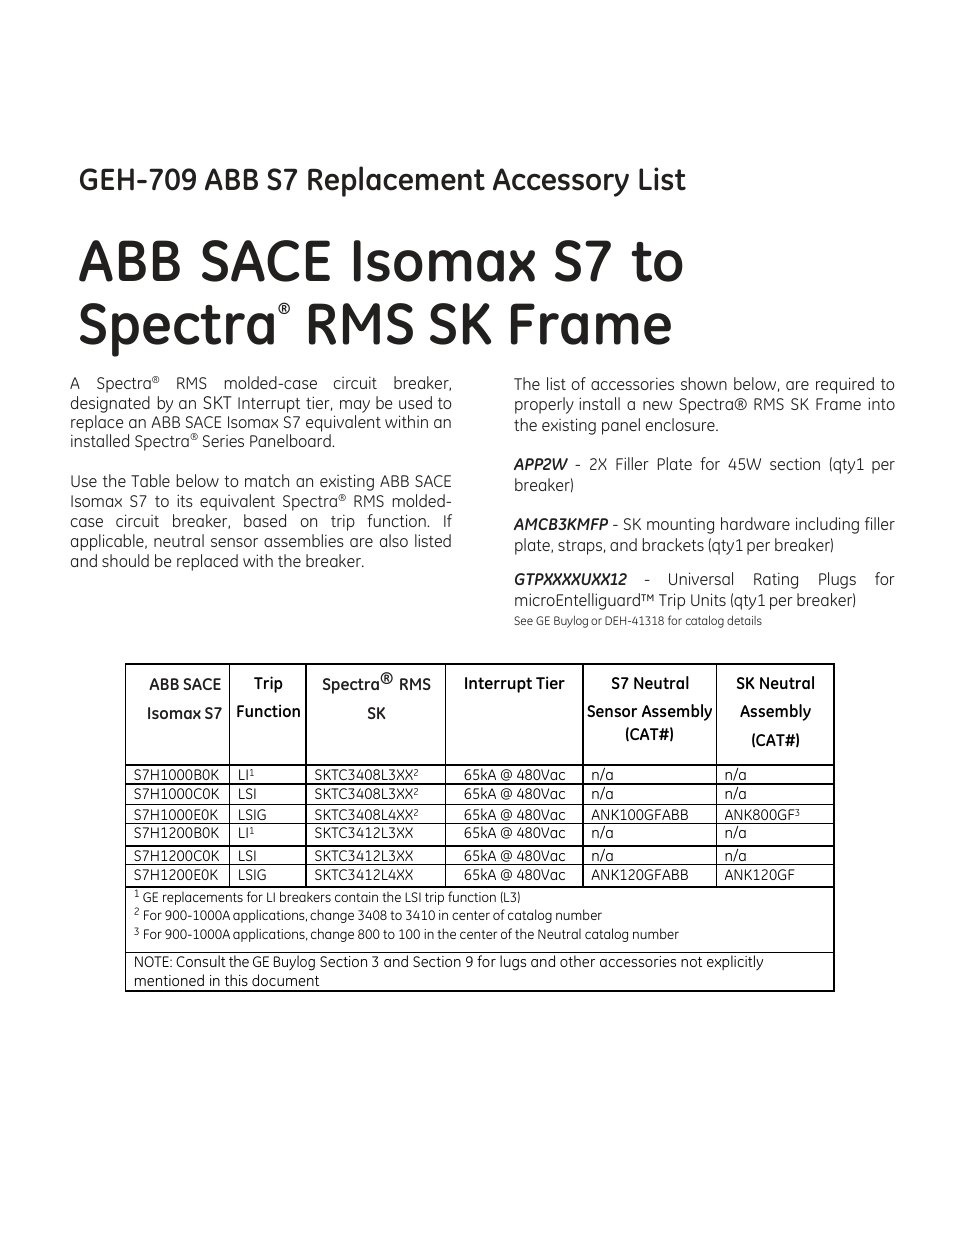 ABB SACE Isomax S7 to Spectra RMS SK Frame